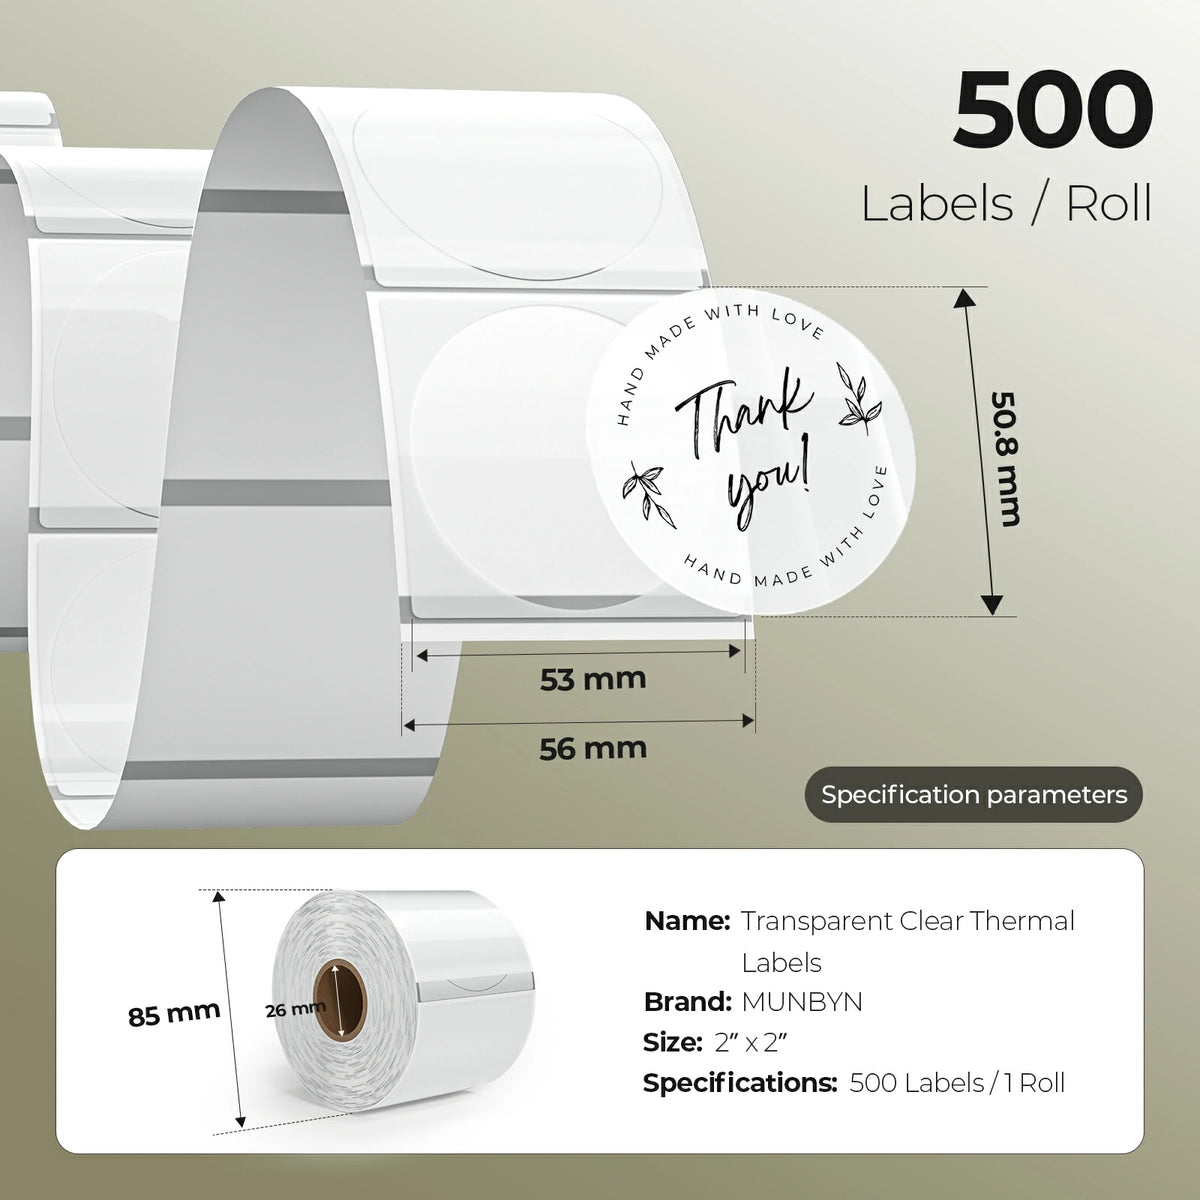 MUNBYN's clear circle thermal labels are 2" x 2" and come with 500 labels per roll.